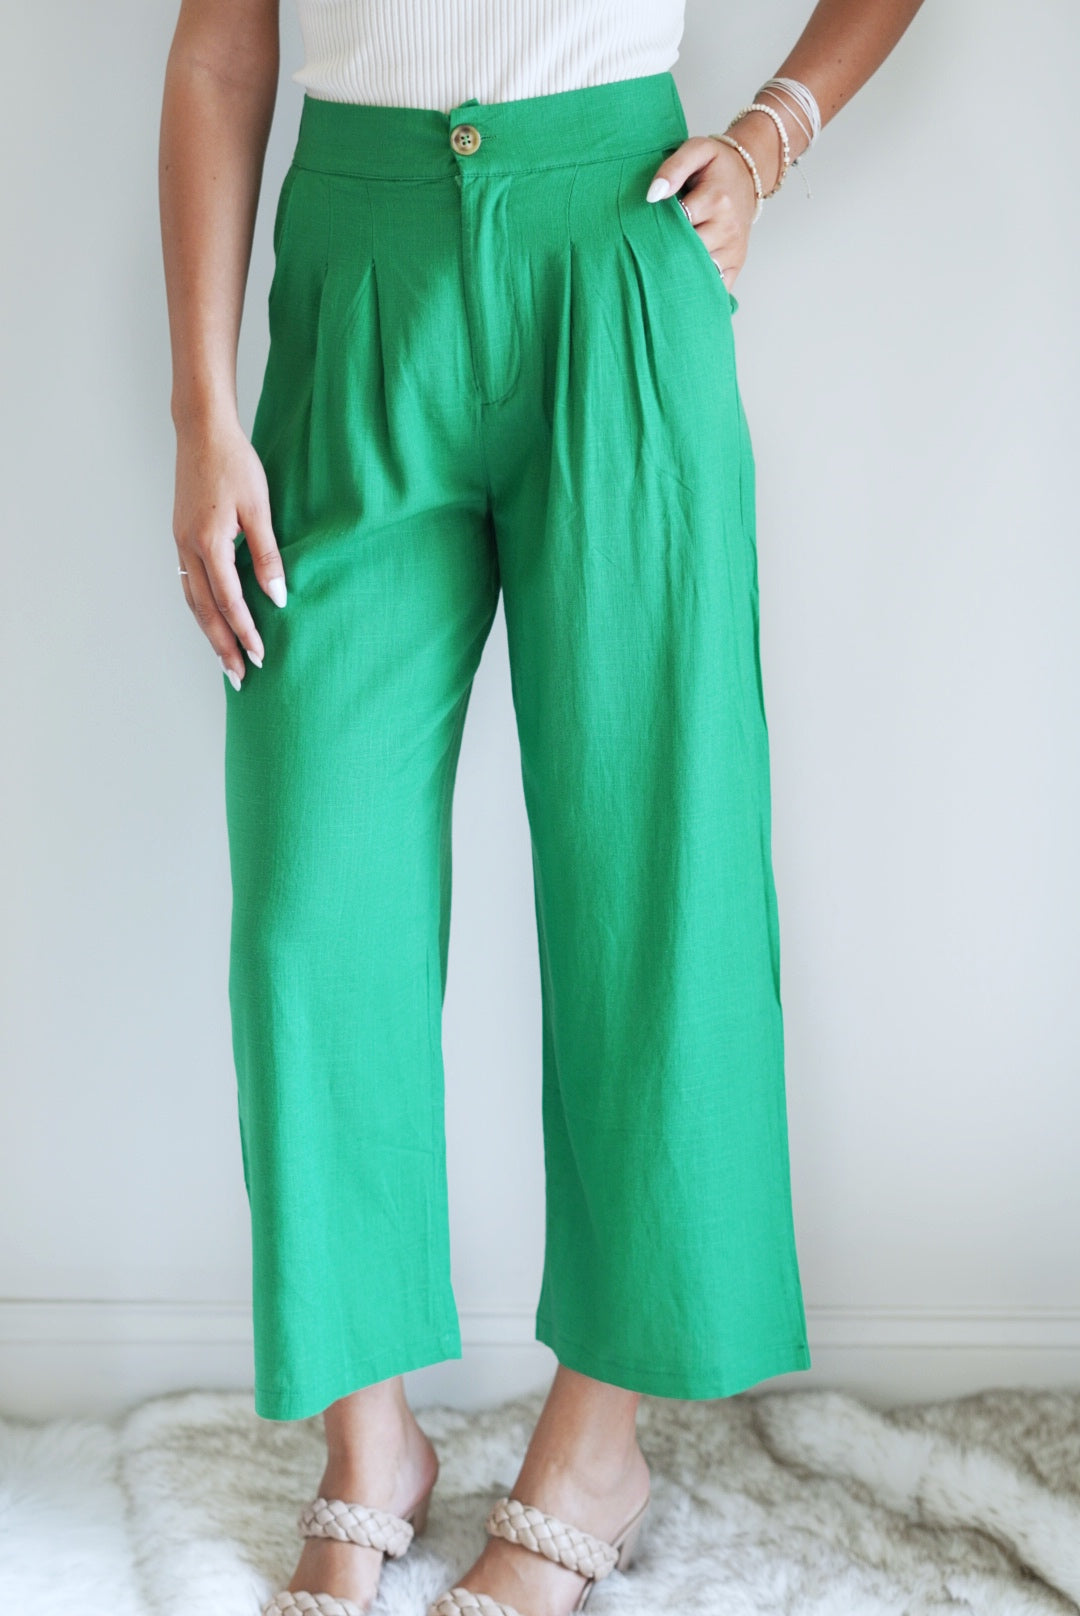 Penelope Pleated Linen Dress Pants Button Closure, Elastic waistband on back of pants. Wide leg, Length goes too ankles. Pleated Material Colors: Fuchsia/Green 85% Polyester,15% Linen Hand Wash Cold, Do Not Bleach, Hang Dry, Cool Iron Do Not Dry Clean Model is wearing size small